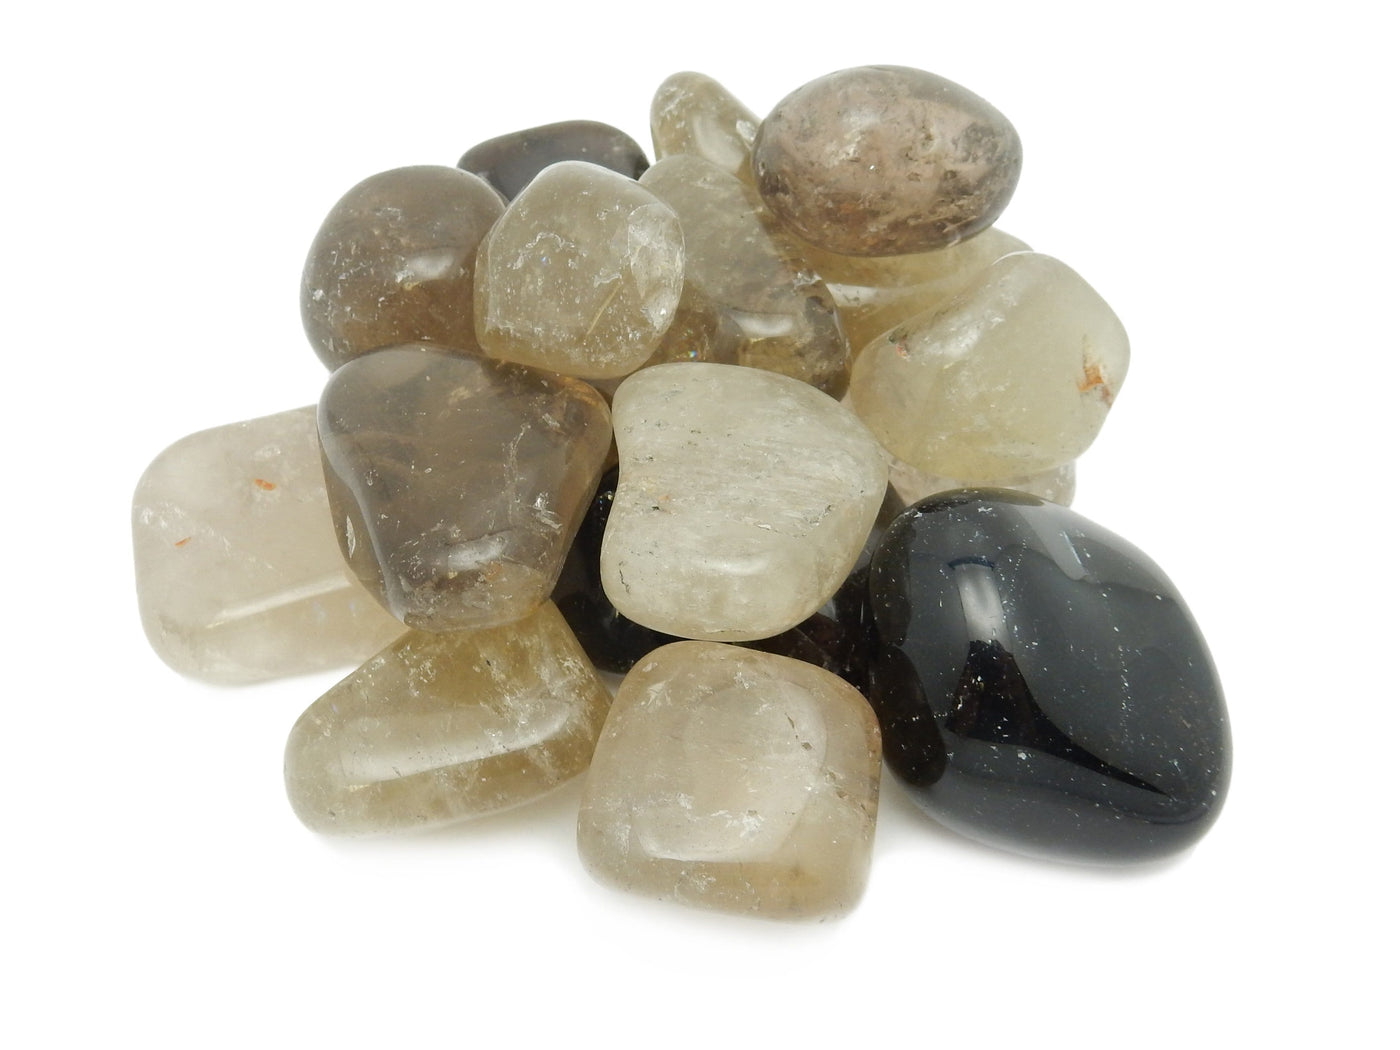 A cluster of tumbled smoky quartz of colors varying from light to dark, presented on a white background